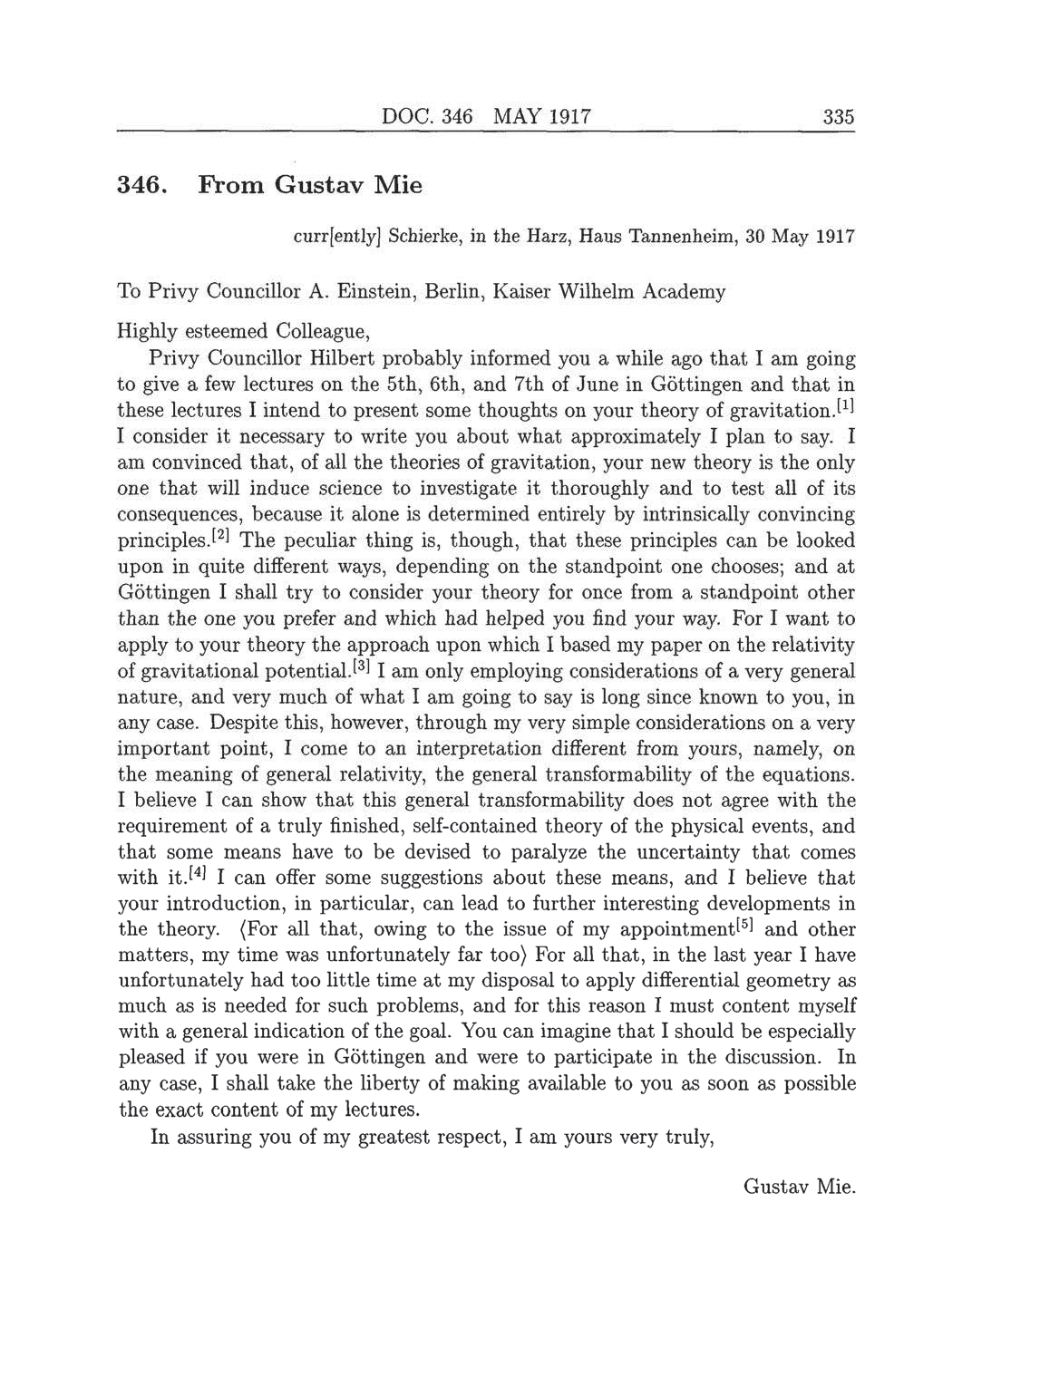 Volume 8: The Berlin Years: Correspondence, 1914-1918 (English translation supplement) page 335